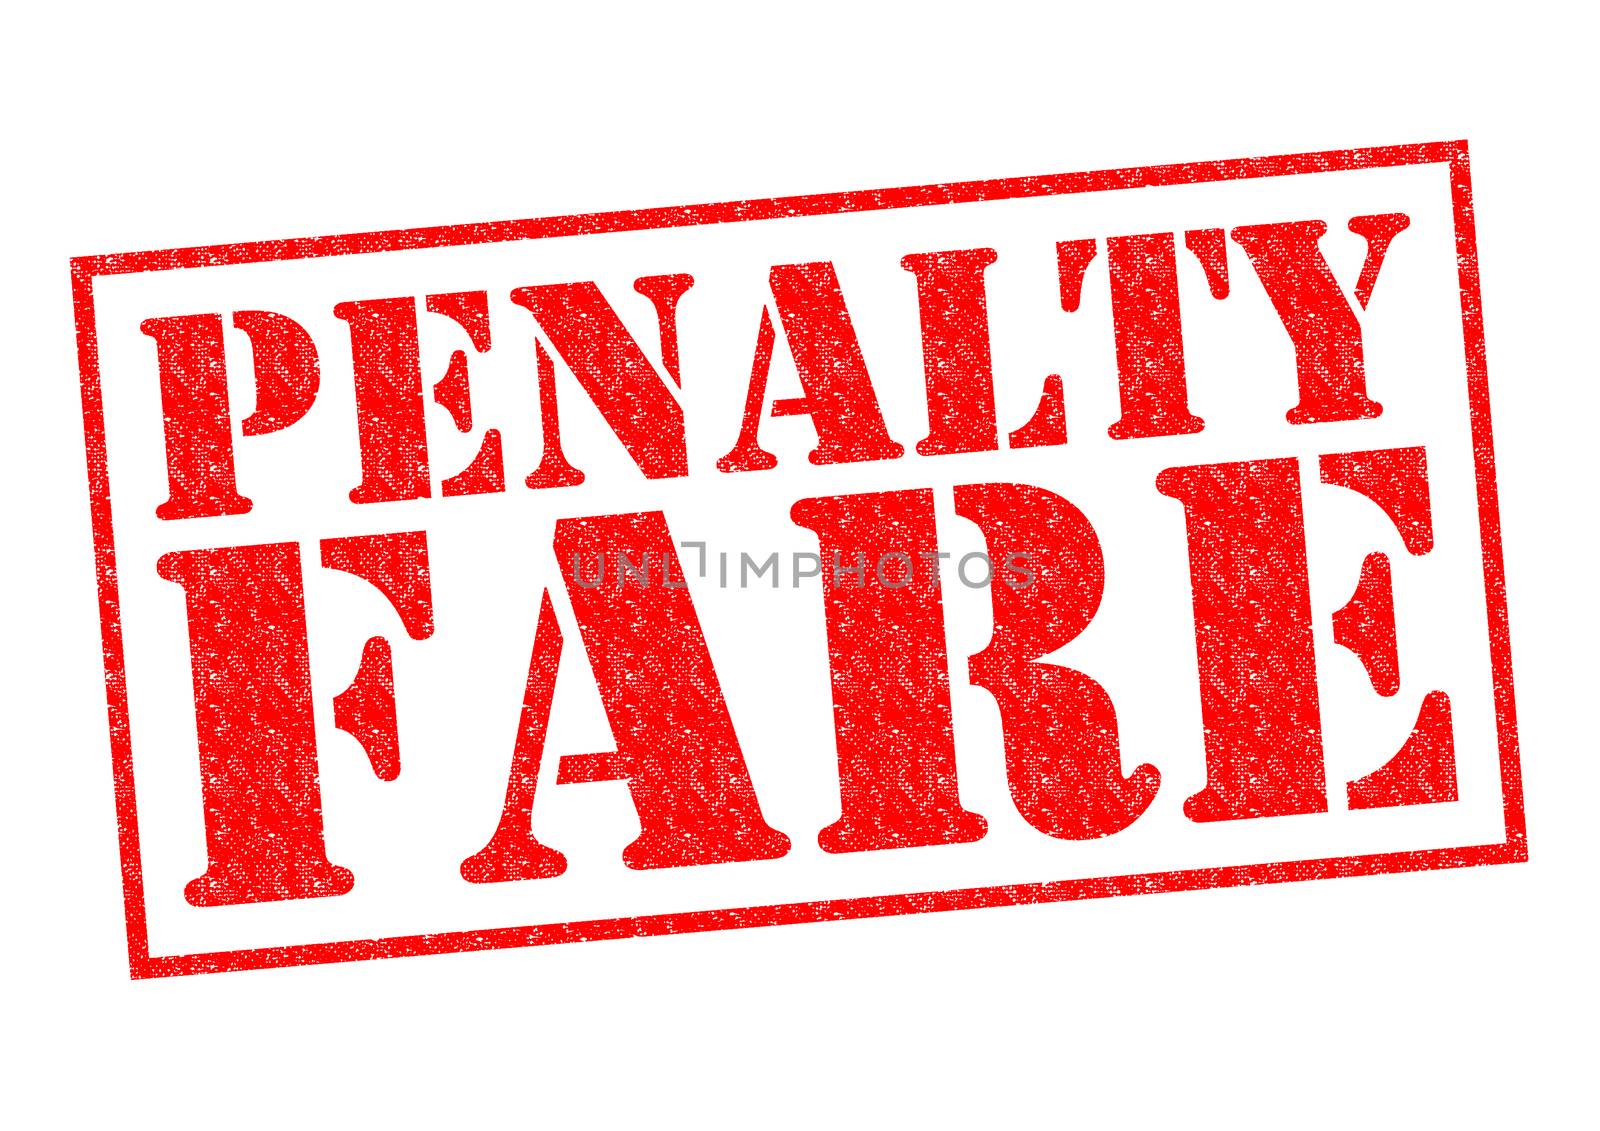 PENALTY FARE red Rubber Stamp over a white background.